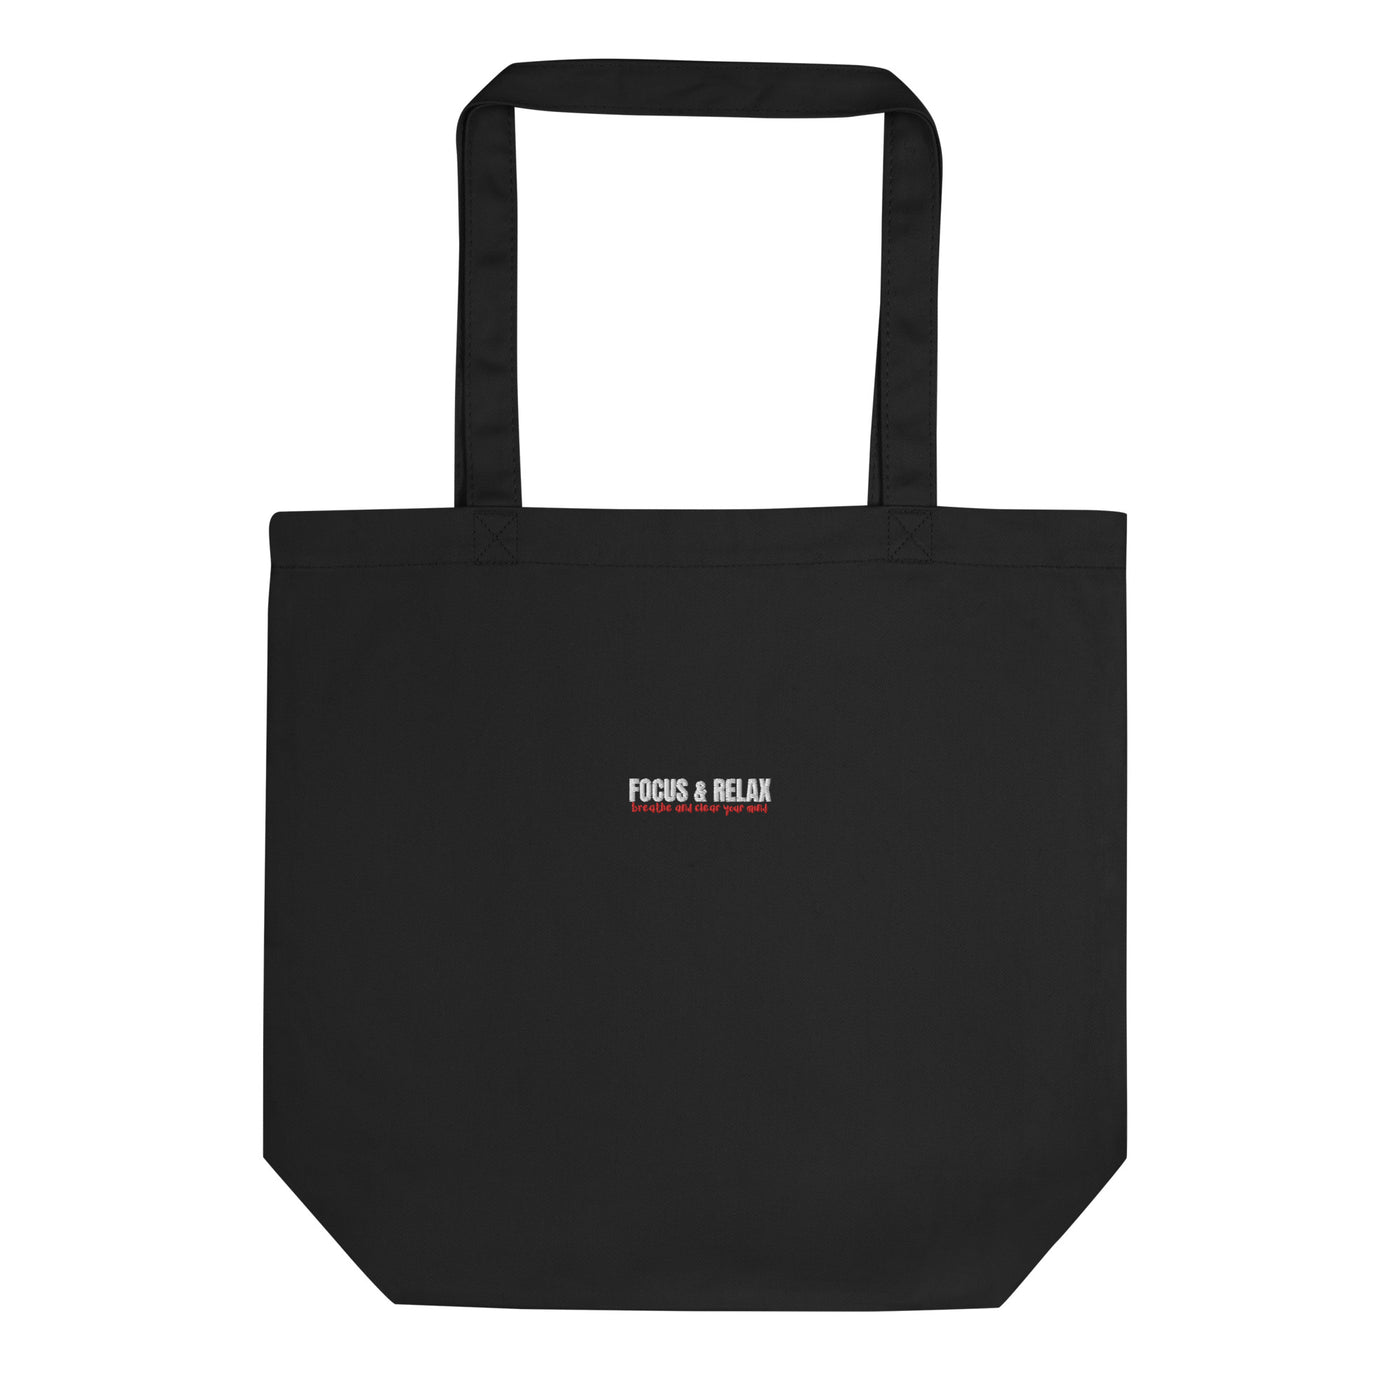 Eco Embroidered Black Tote Bag - Focus & Relax